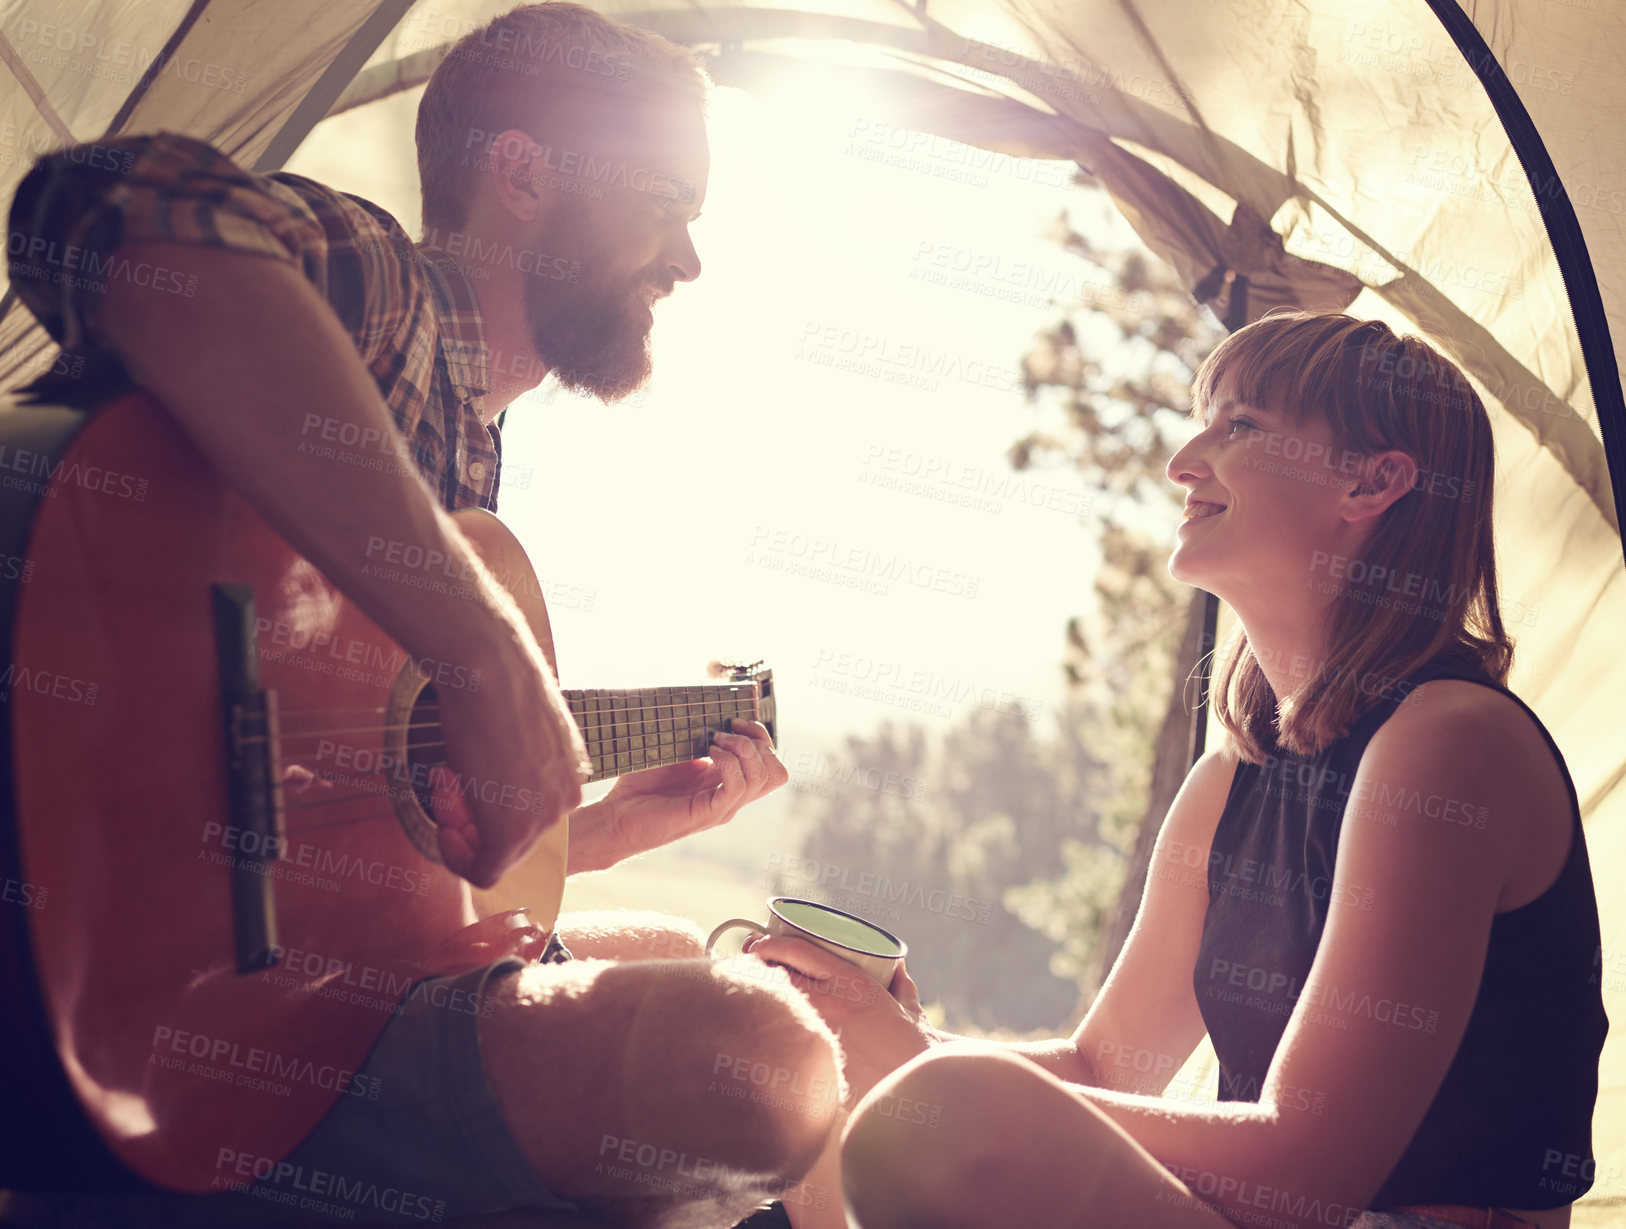 Buy stock photo Shot of a young man playing guitar to his girlfriend in a tent